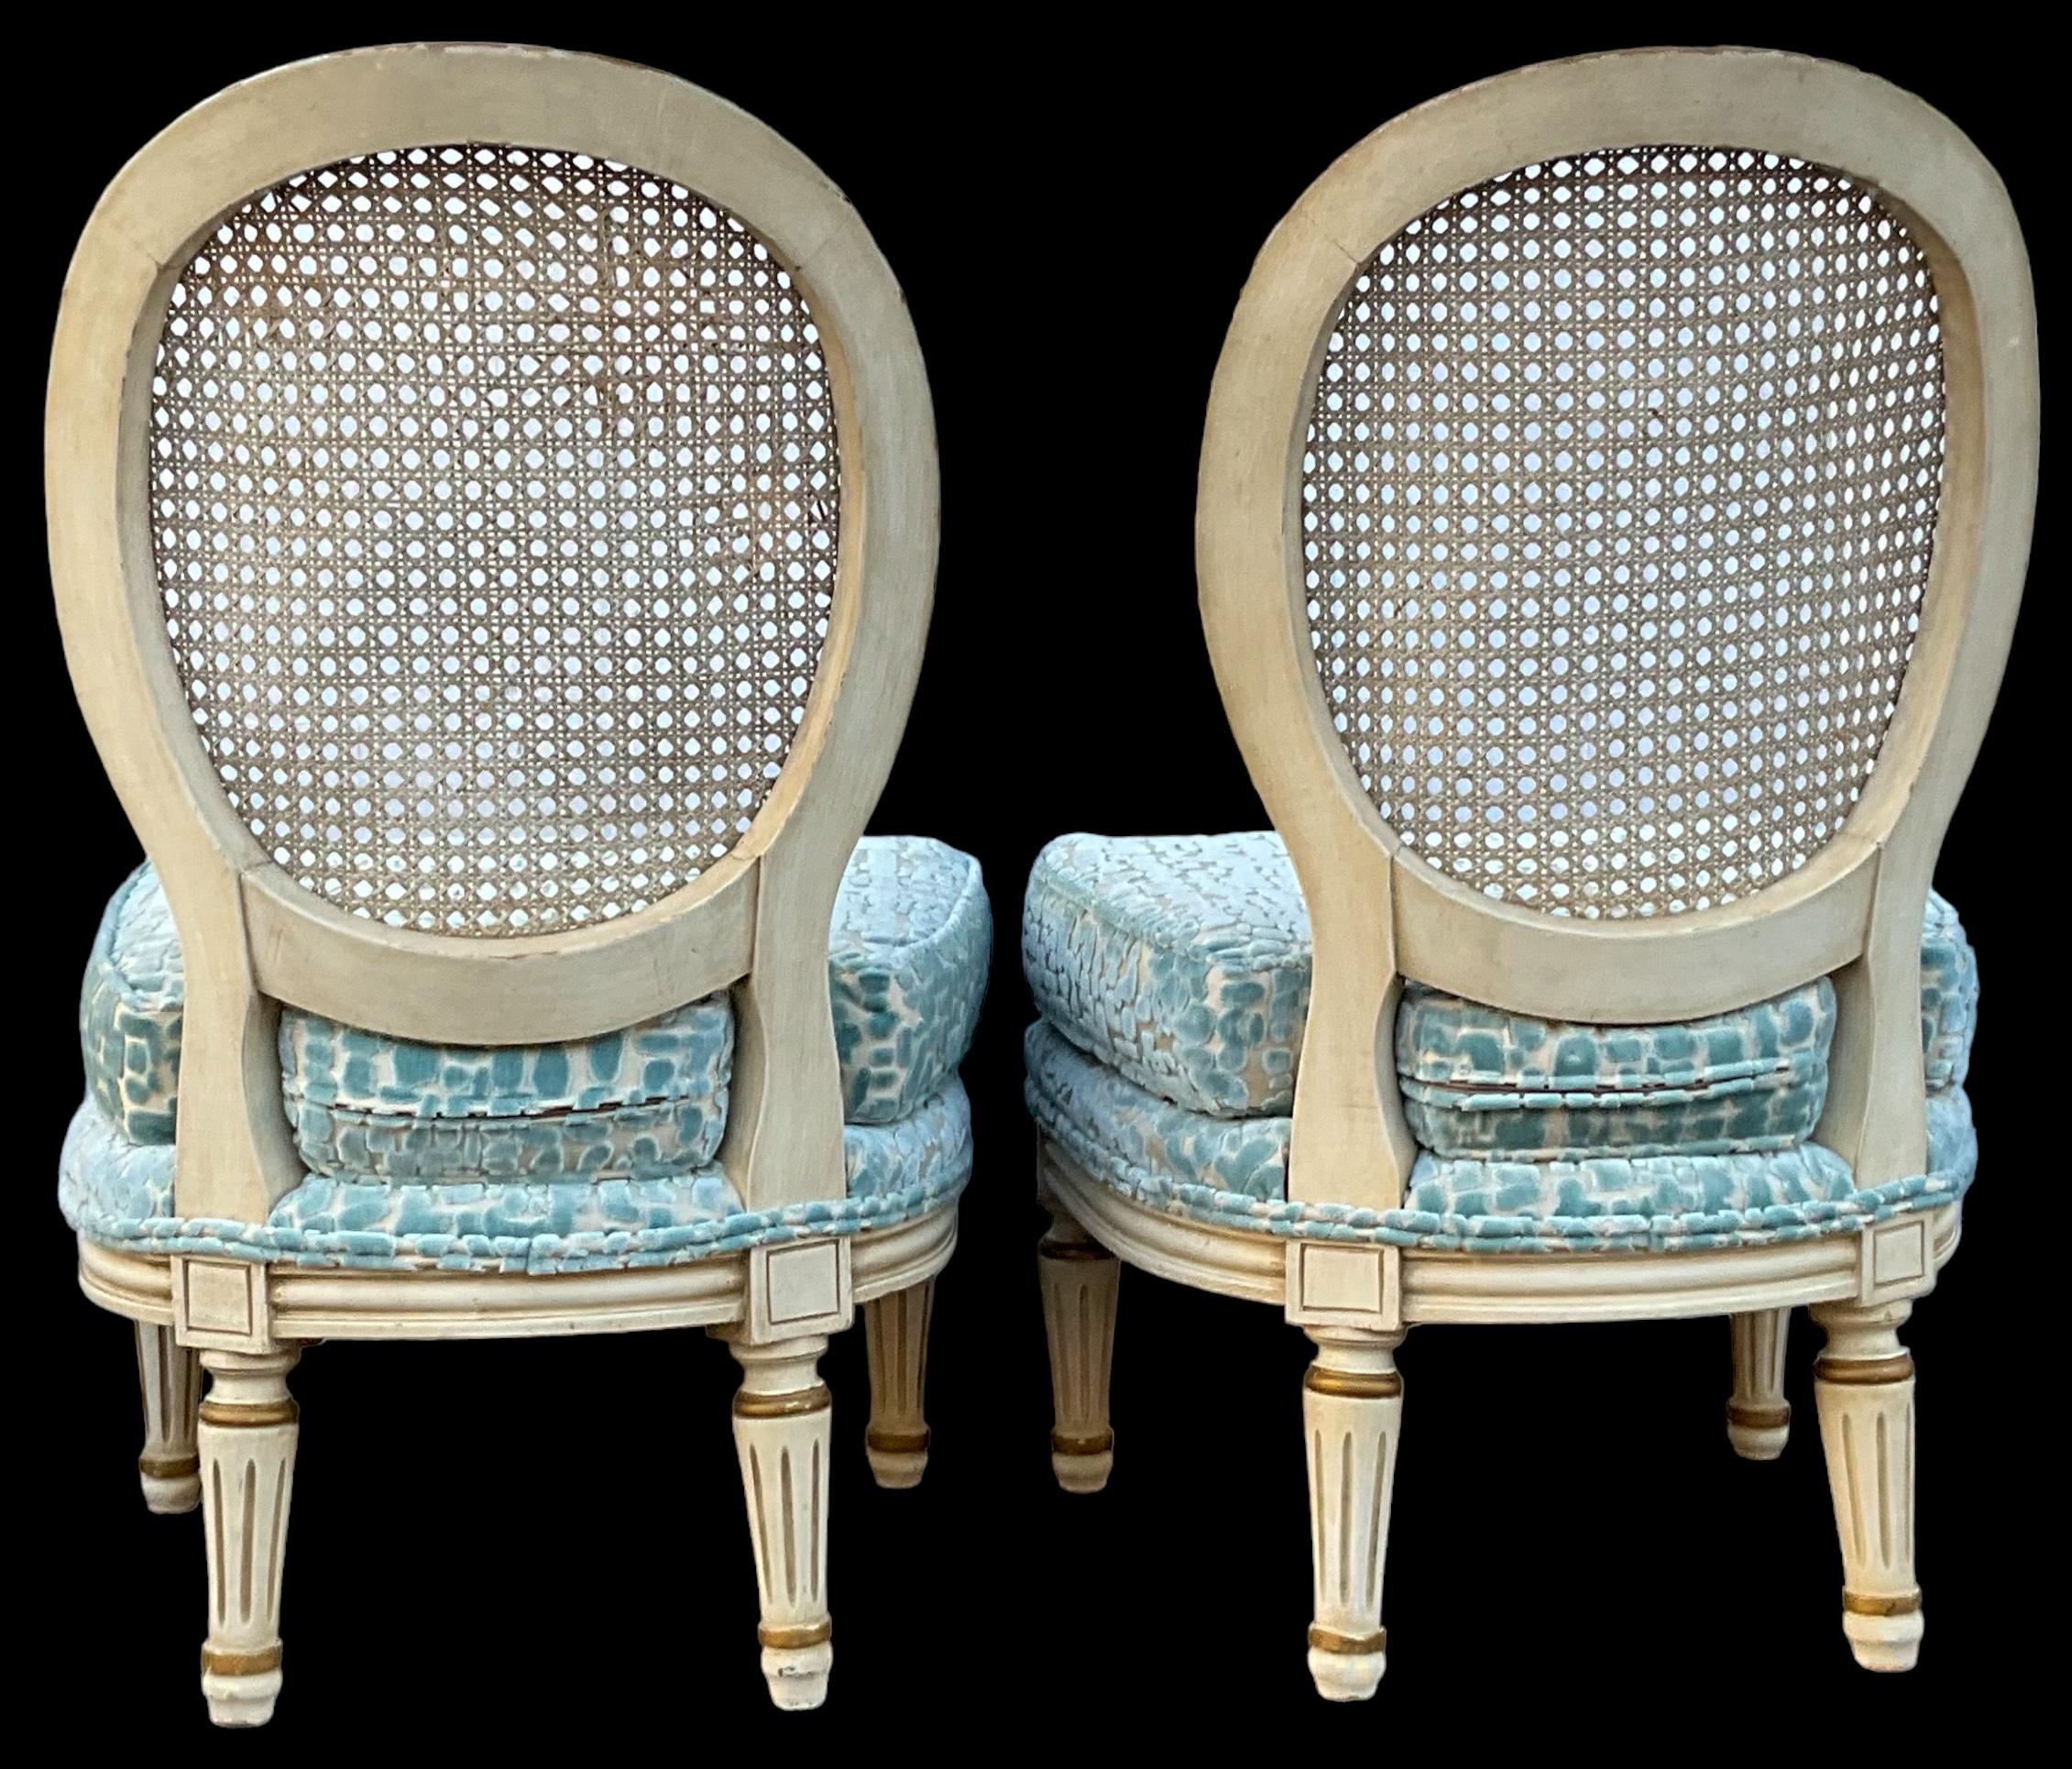 This is a pair of Hollywood Regency Era Italian slipper chairs newly upholstered in a cut velvet. The frame is an ivory paint with gilt accents. The wood has a general wear. They are unmarked.